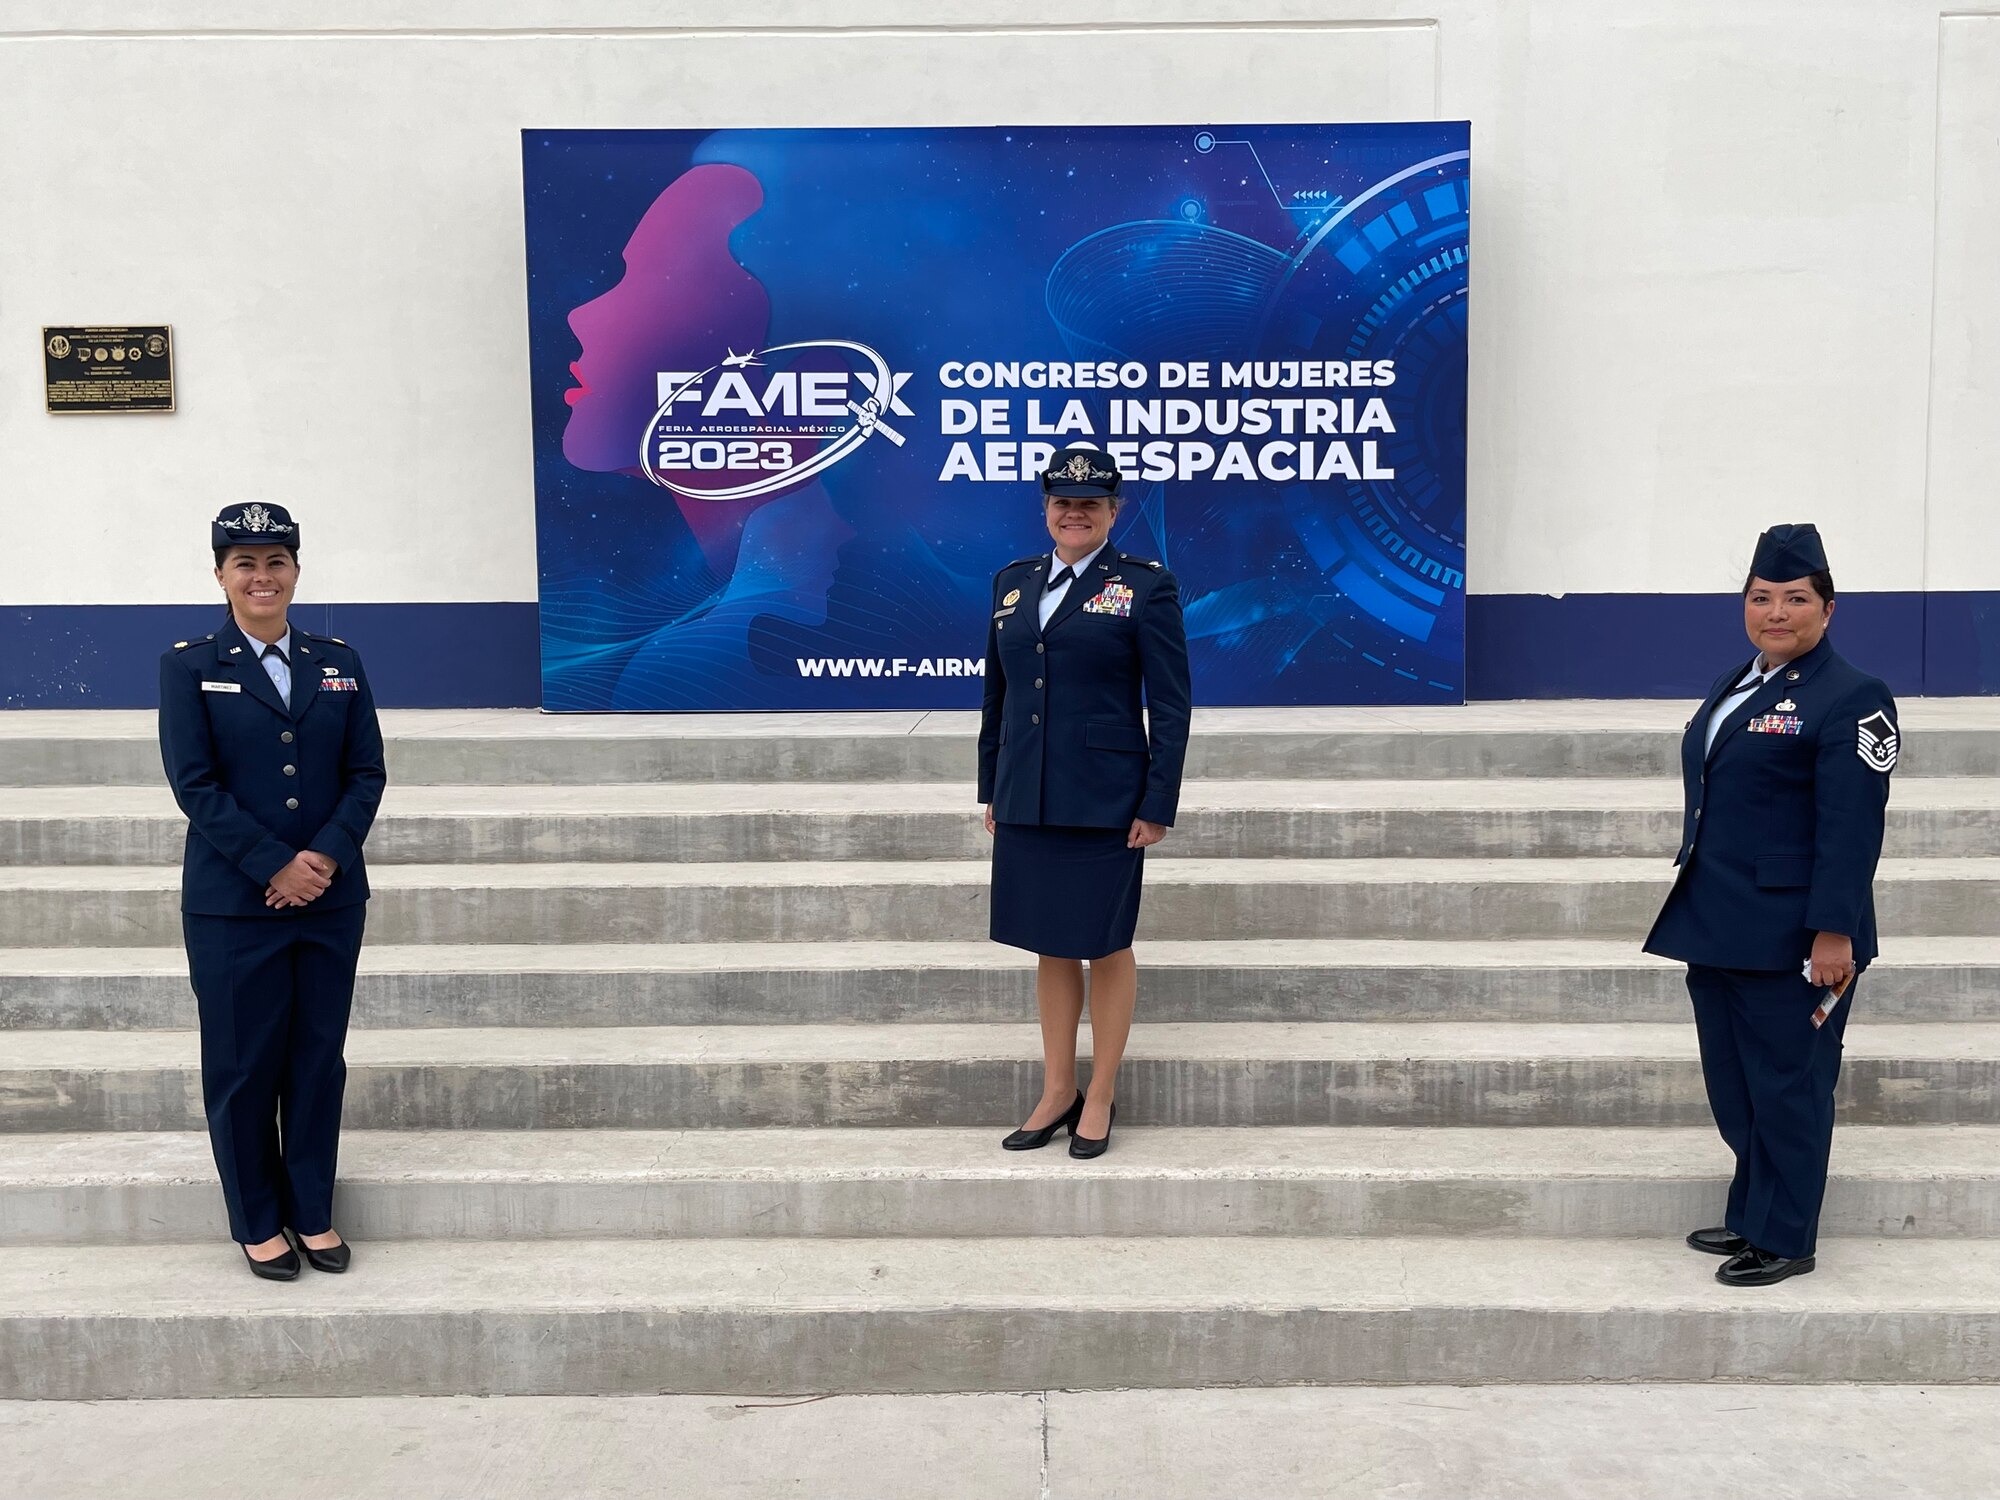 Three women in U.S. Air Force service dress stand on a staircase with a sign in the background that reads "Congreso de Mujeres de la Industria Aeroespacial FAMEX 2023"